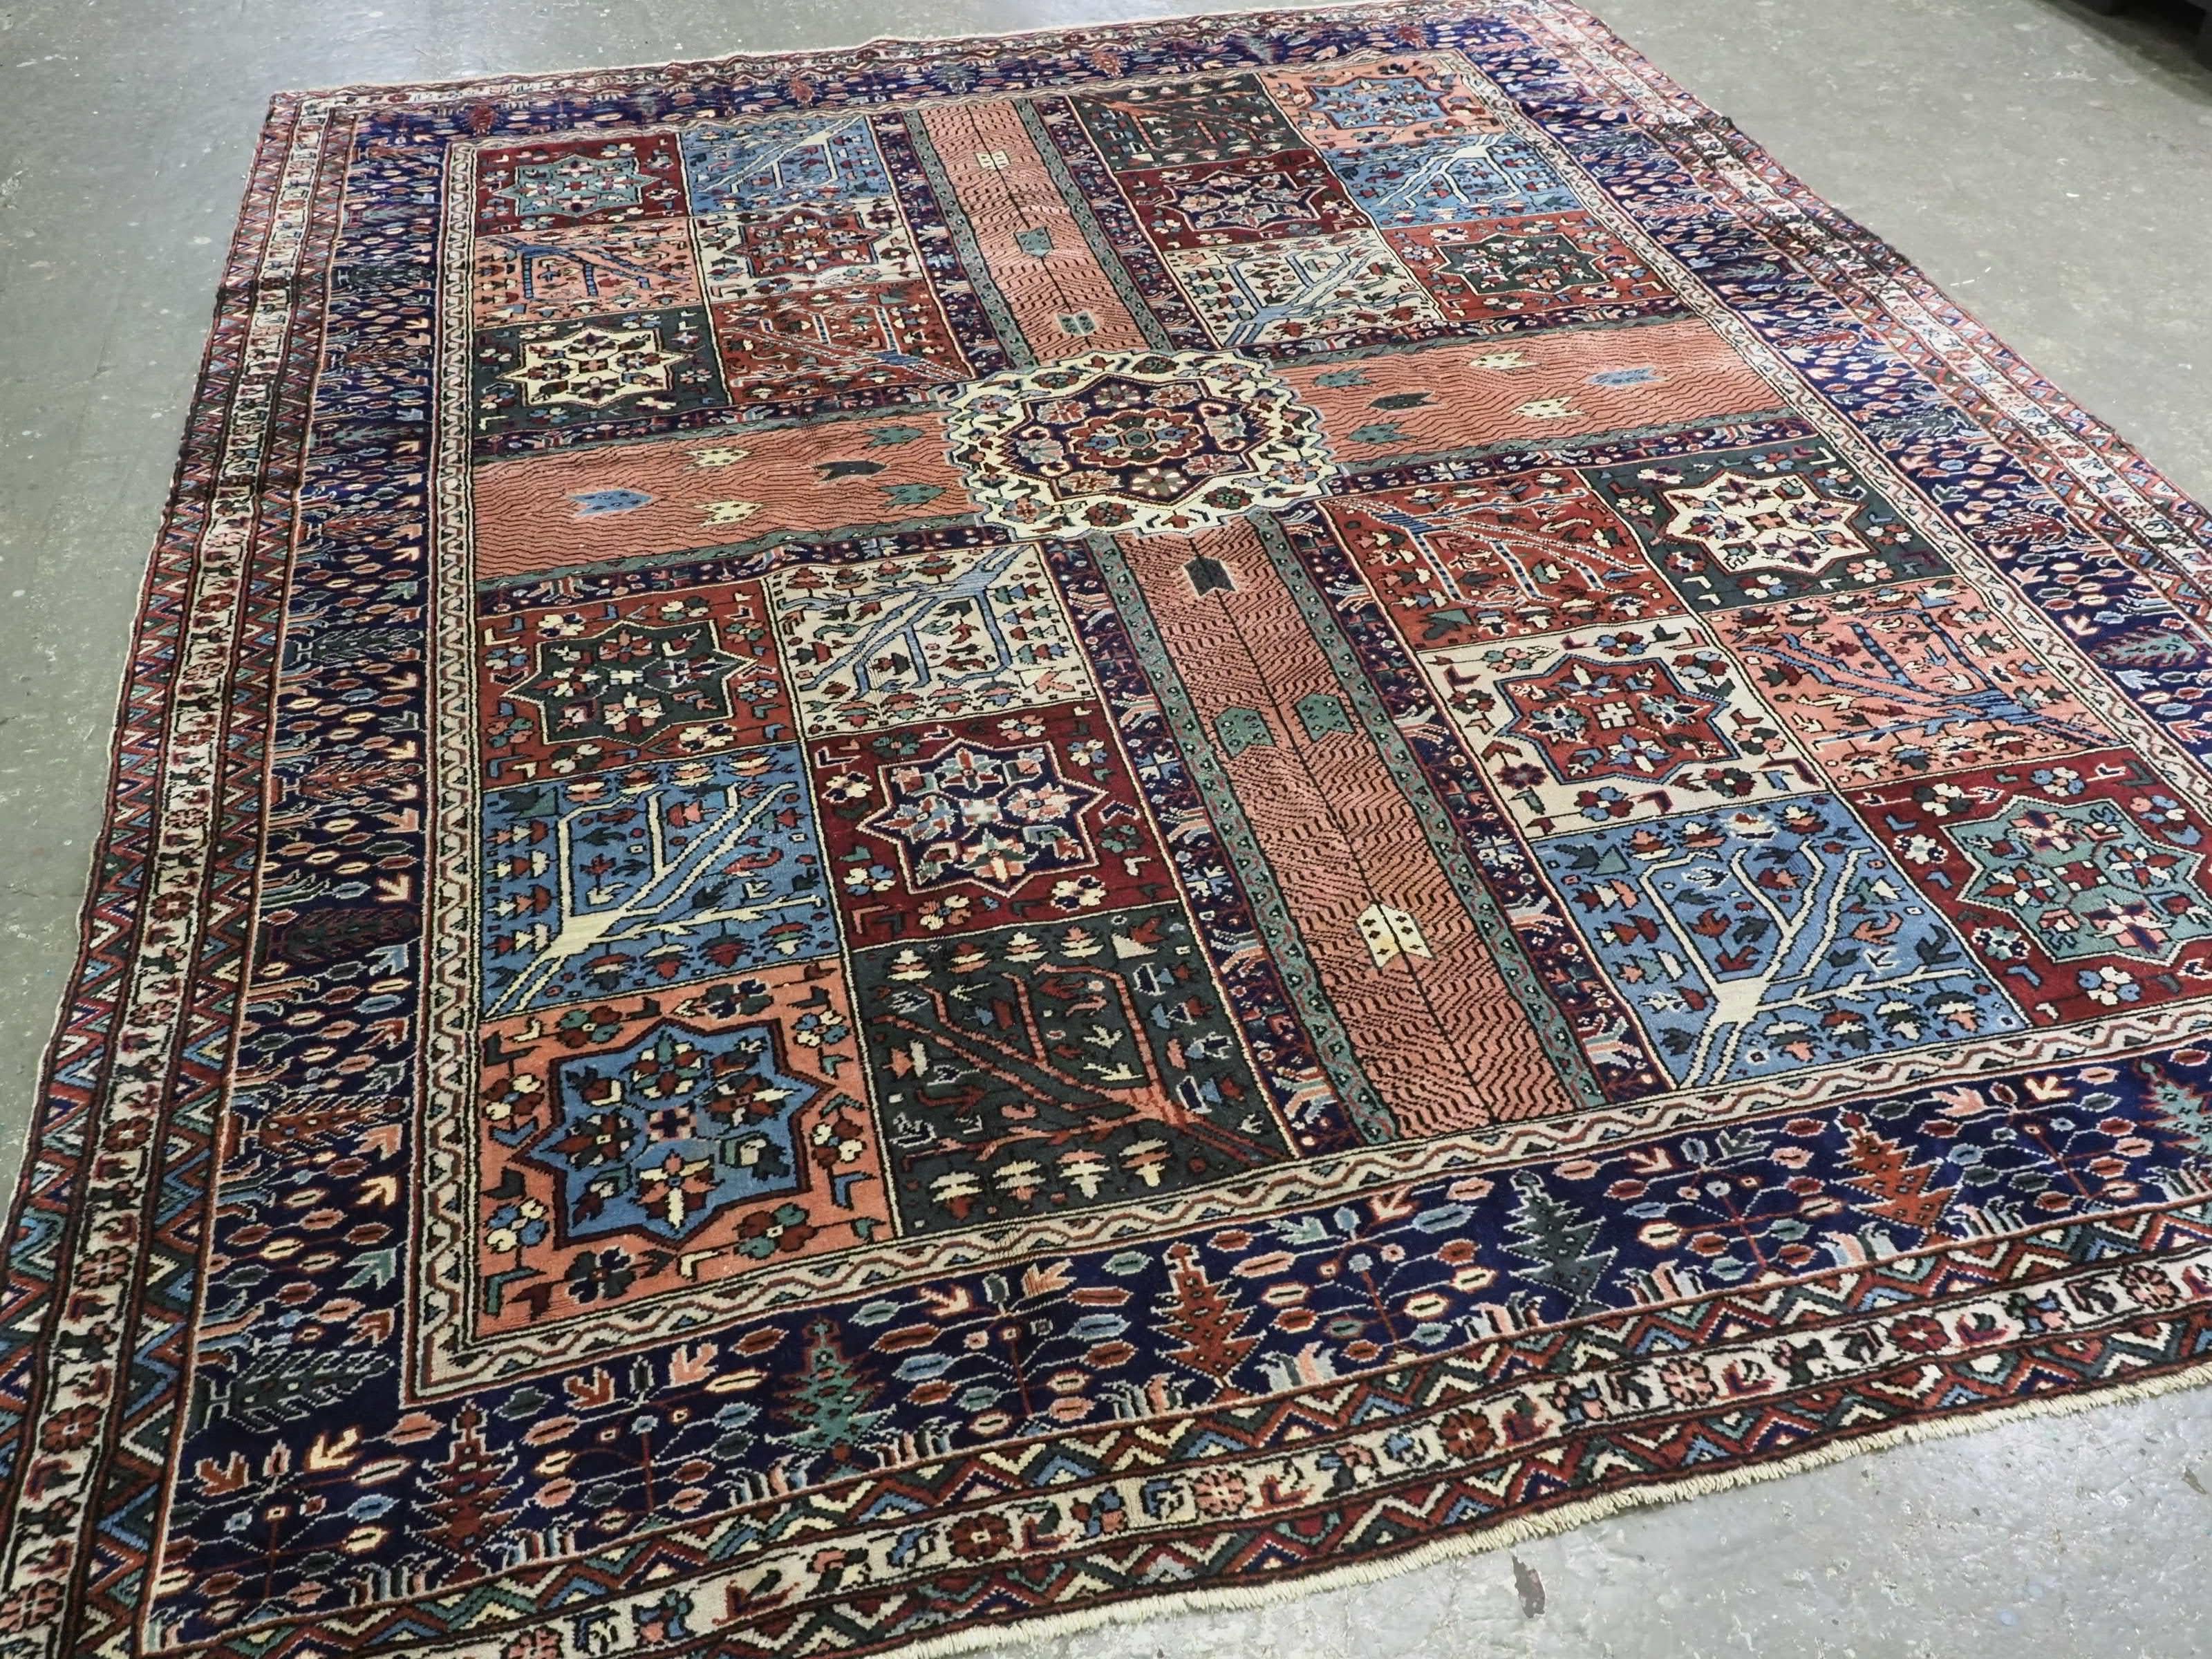 Size: 10ft 11in x 8ft 10in (332 x 268cm).

Antique Turkish Kula rug of traditional 'Persian garden' design.

Circa 1900.

This excellent carpet is drawn with a tradition garden design, with water courses and flowering plants and shrubs. The border